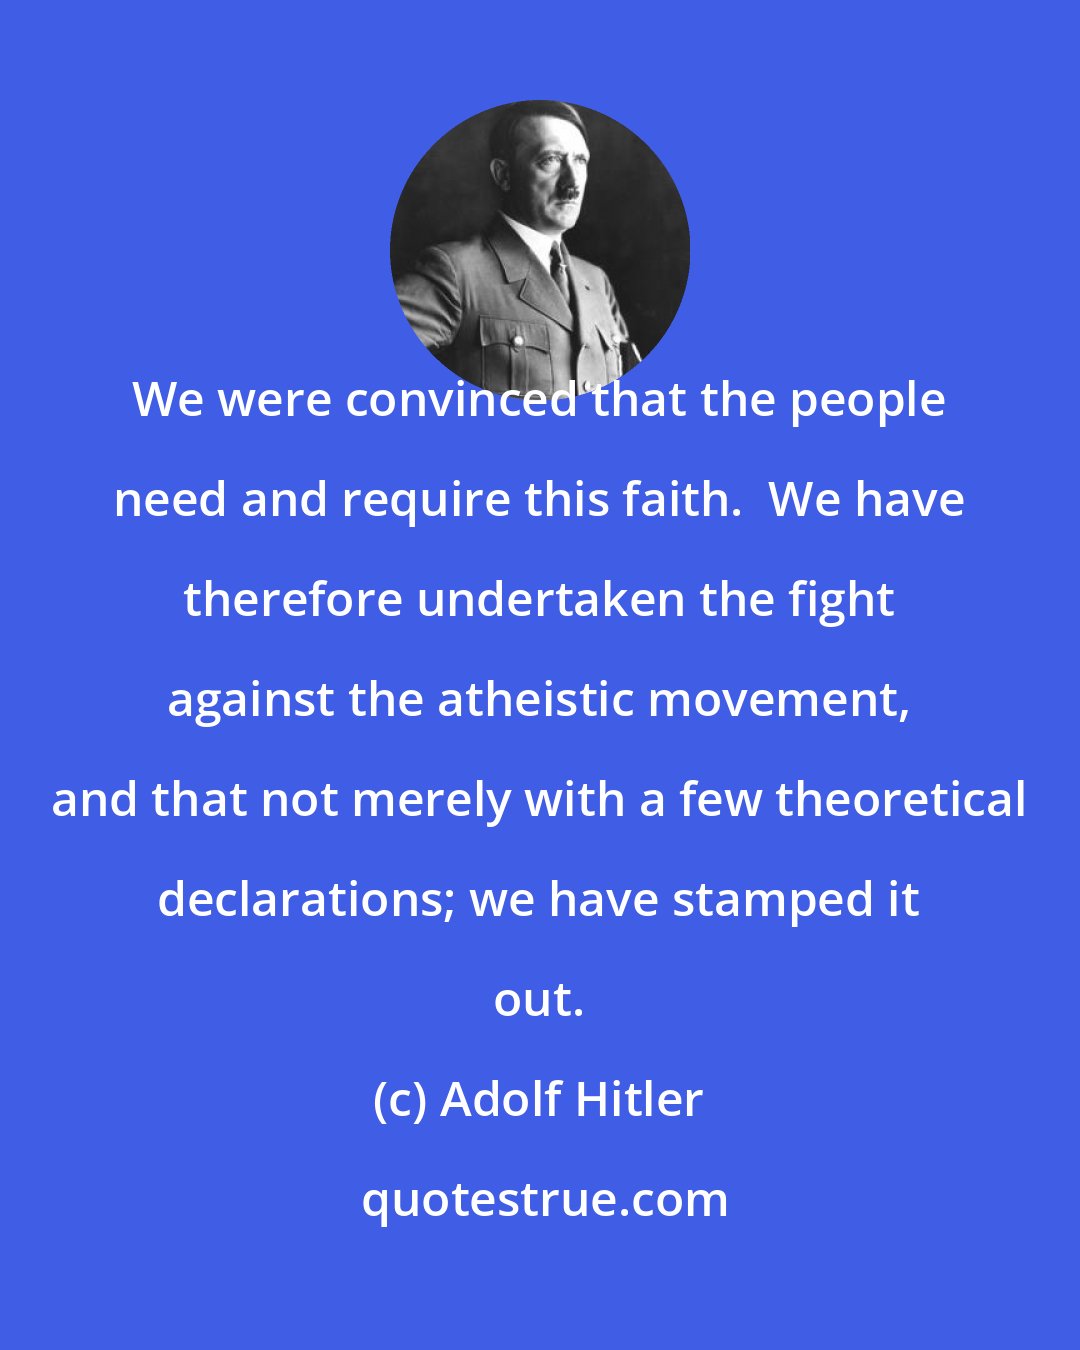 Adolf Hitler: We were convinced that the people need and require this faith.  We have therefore undertaken the fight against the atheistic movement, and that not merely with a few theoretical declarations; we have stamped it out.